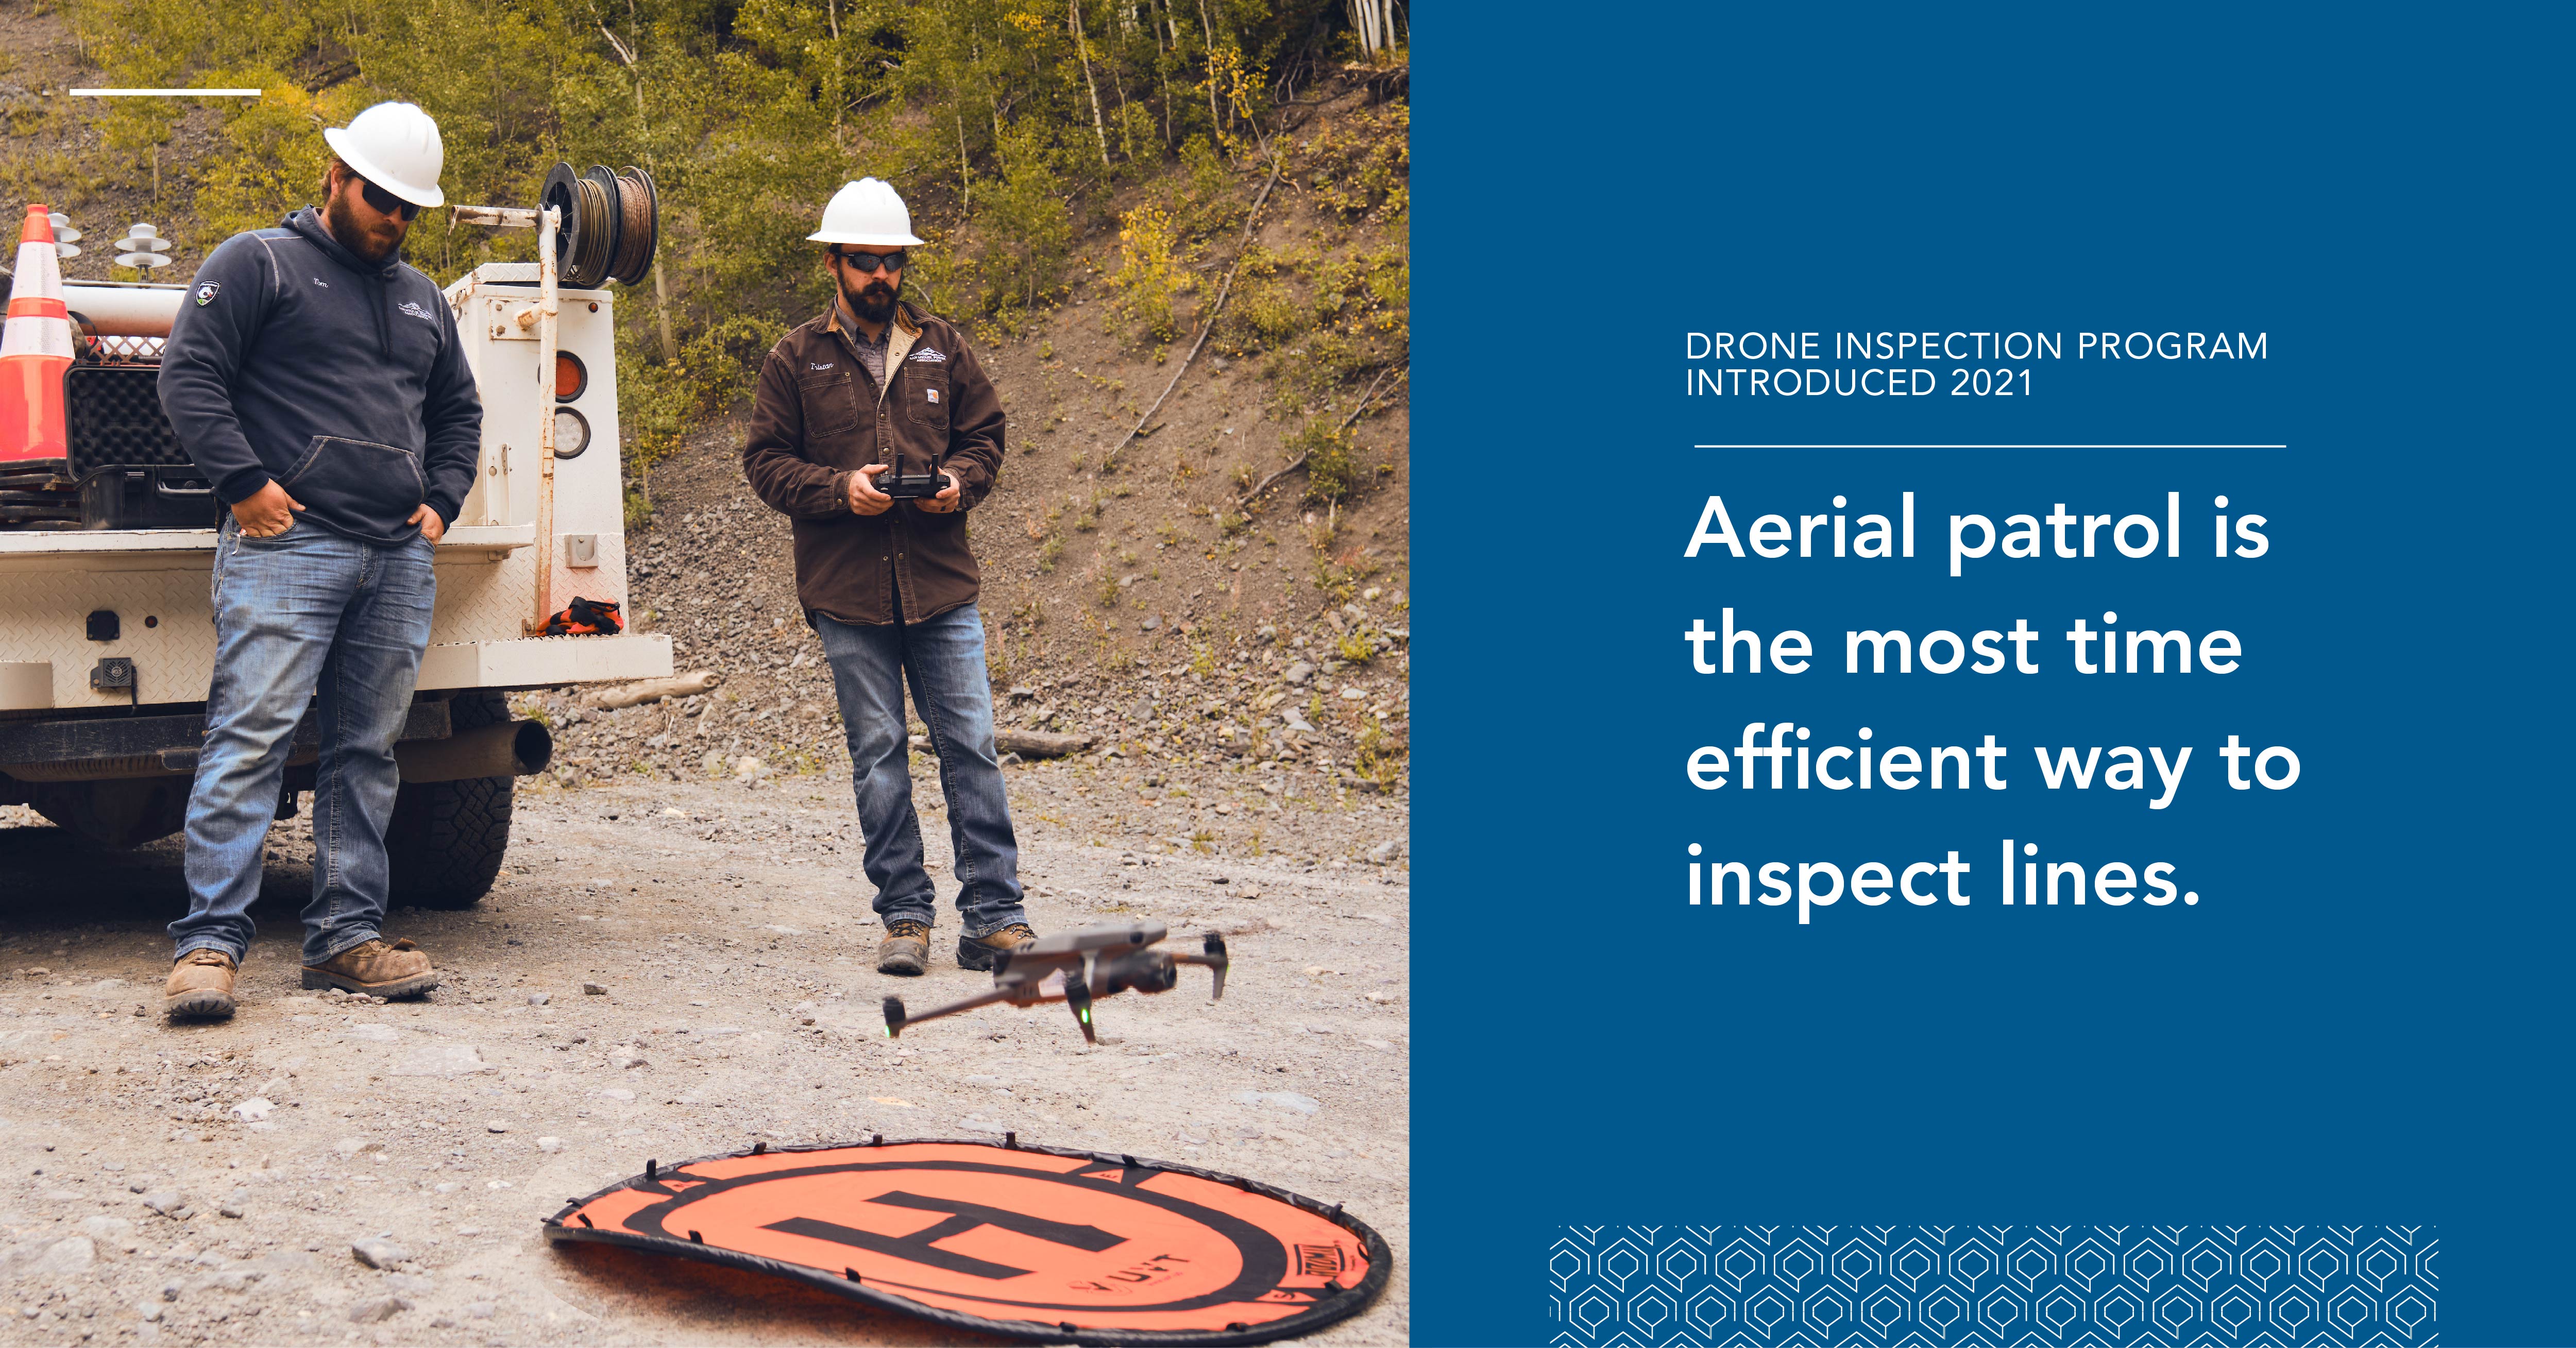 Drone inspection tools for fire mitigation in Colorado